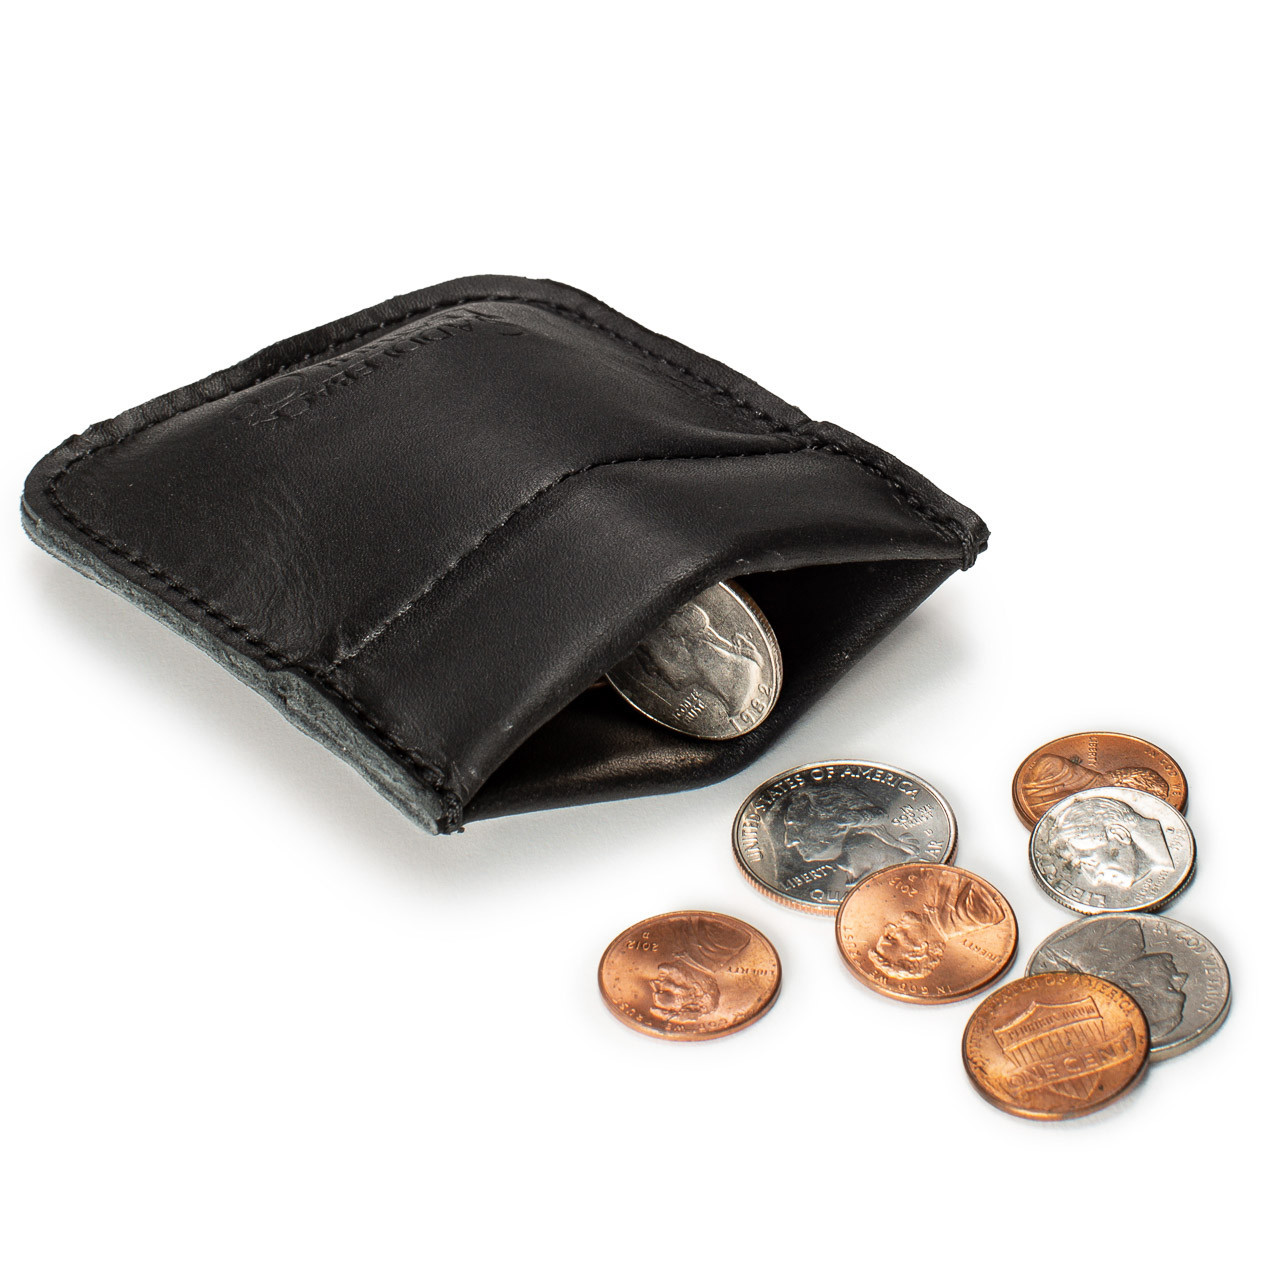 Tandy Leather Two-Pocket Coin Purse Kit 44102-00